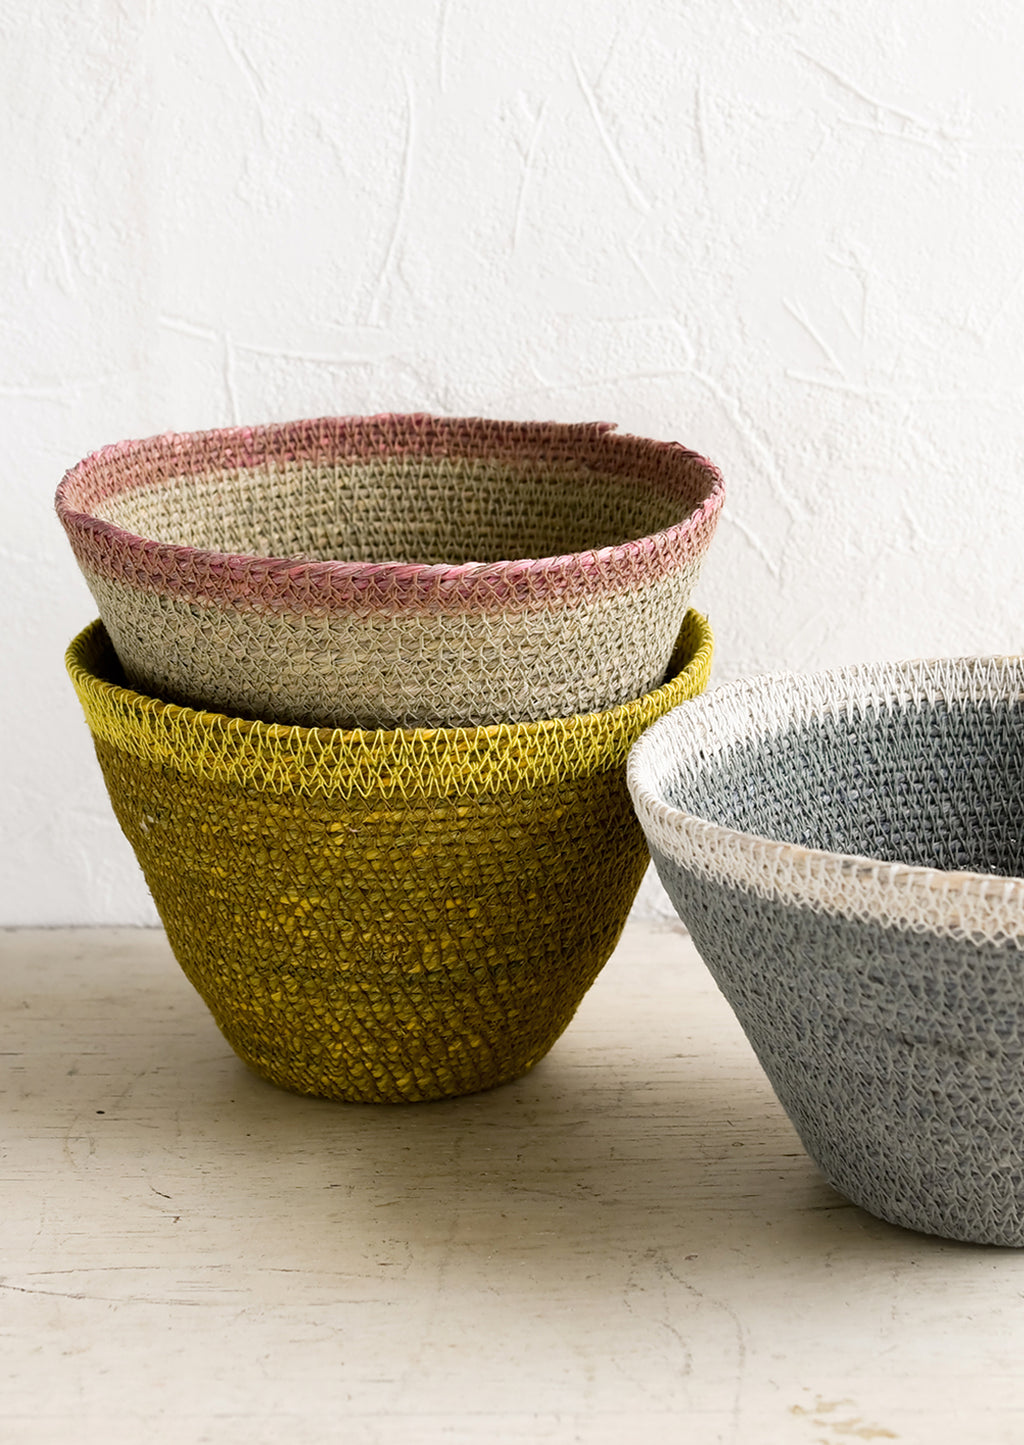 2: Three tapered storage baskets in assorted colors.